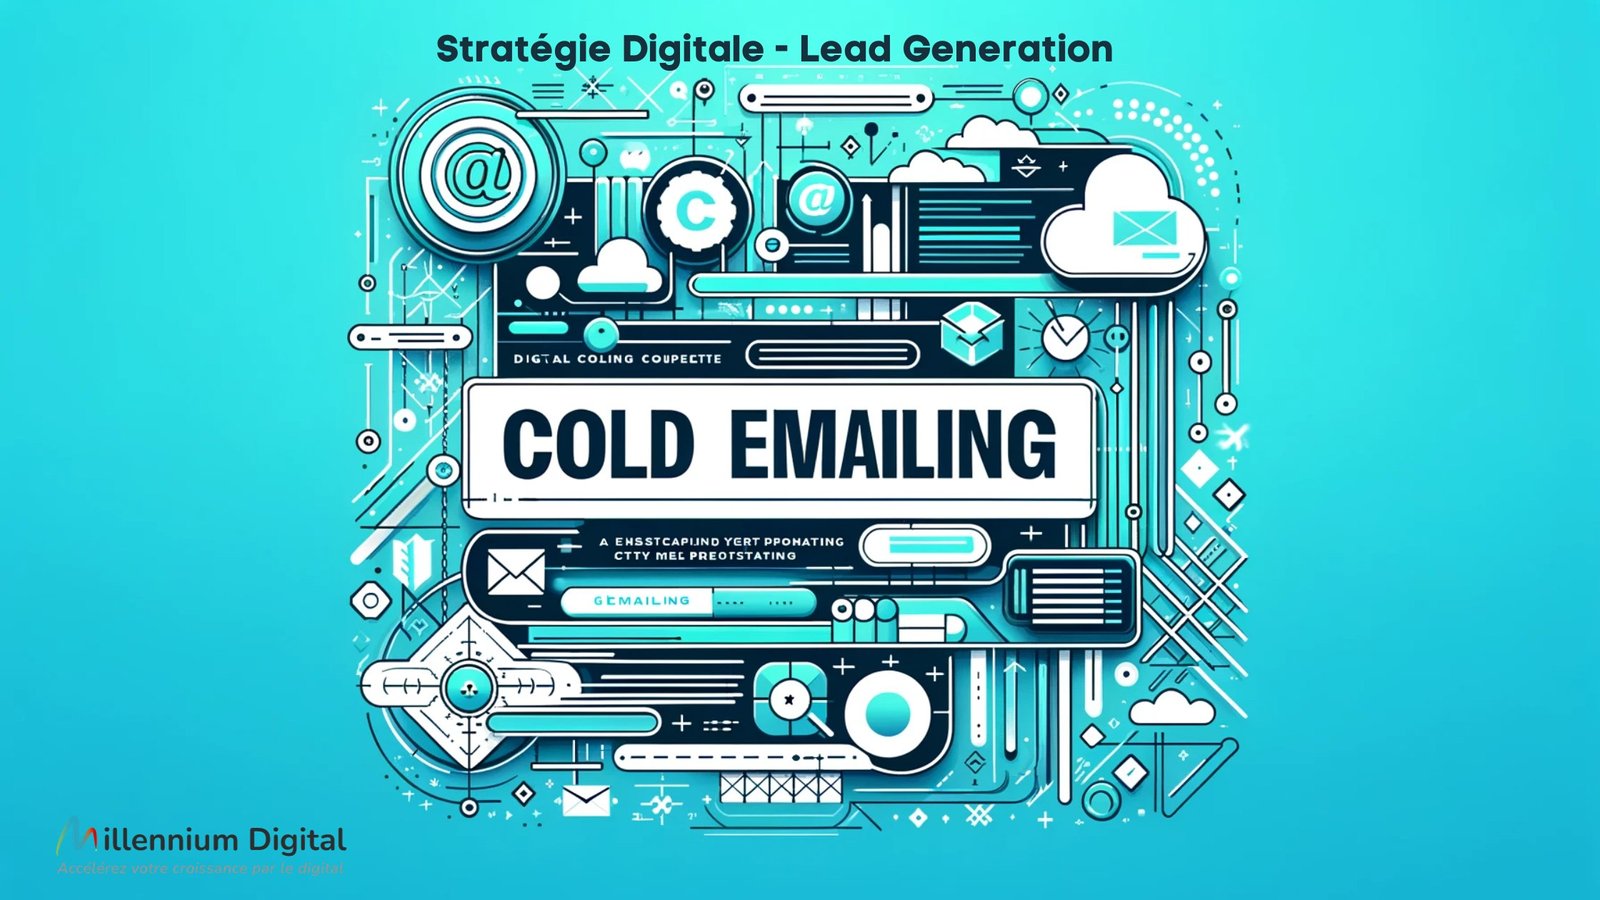 infographic with minimal text, focused on the concept of 'Cold Emailing'